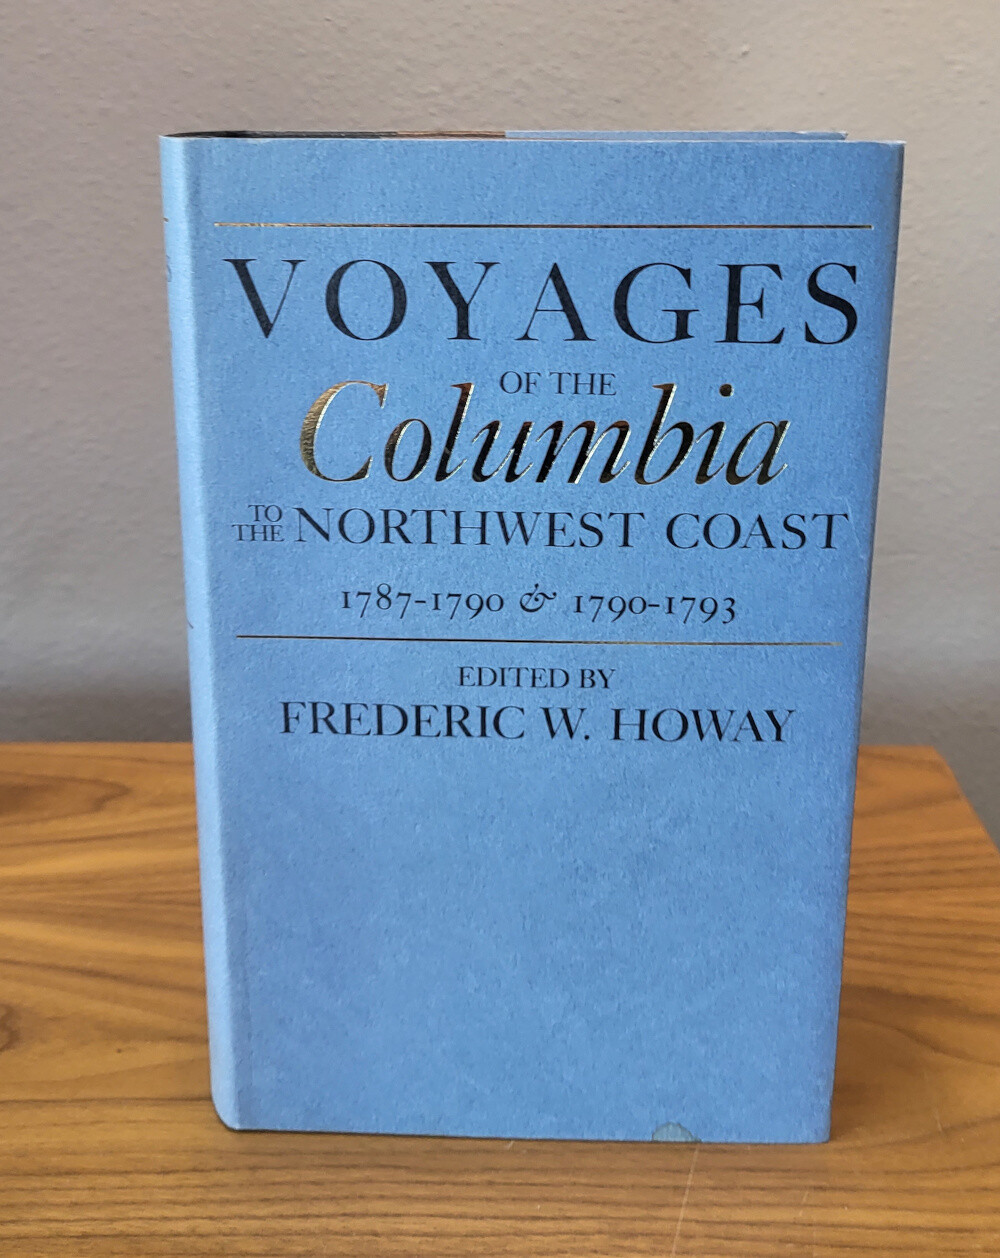 Voyages of the "Columbia" to the Northwest Coast 1787-1790 and 1790-1793